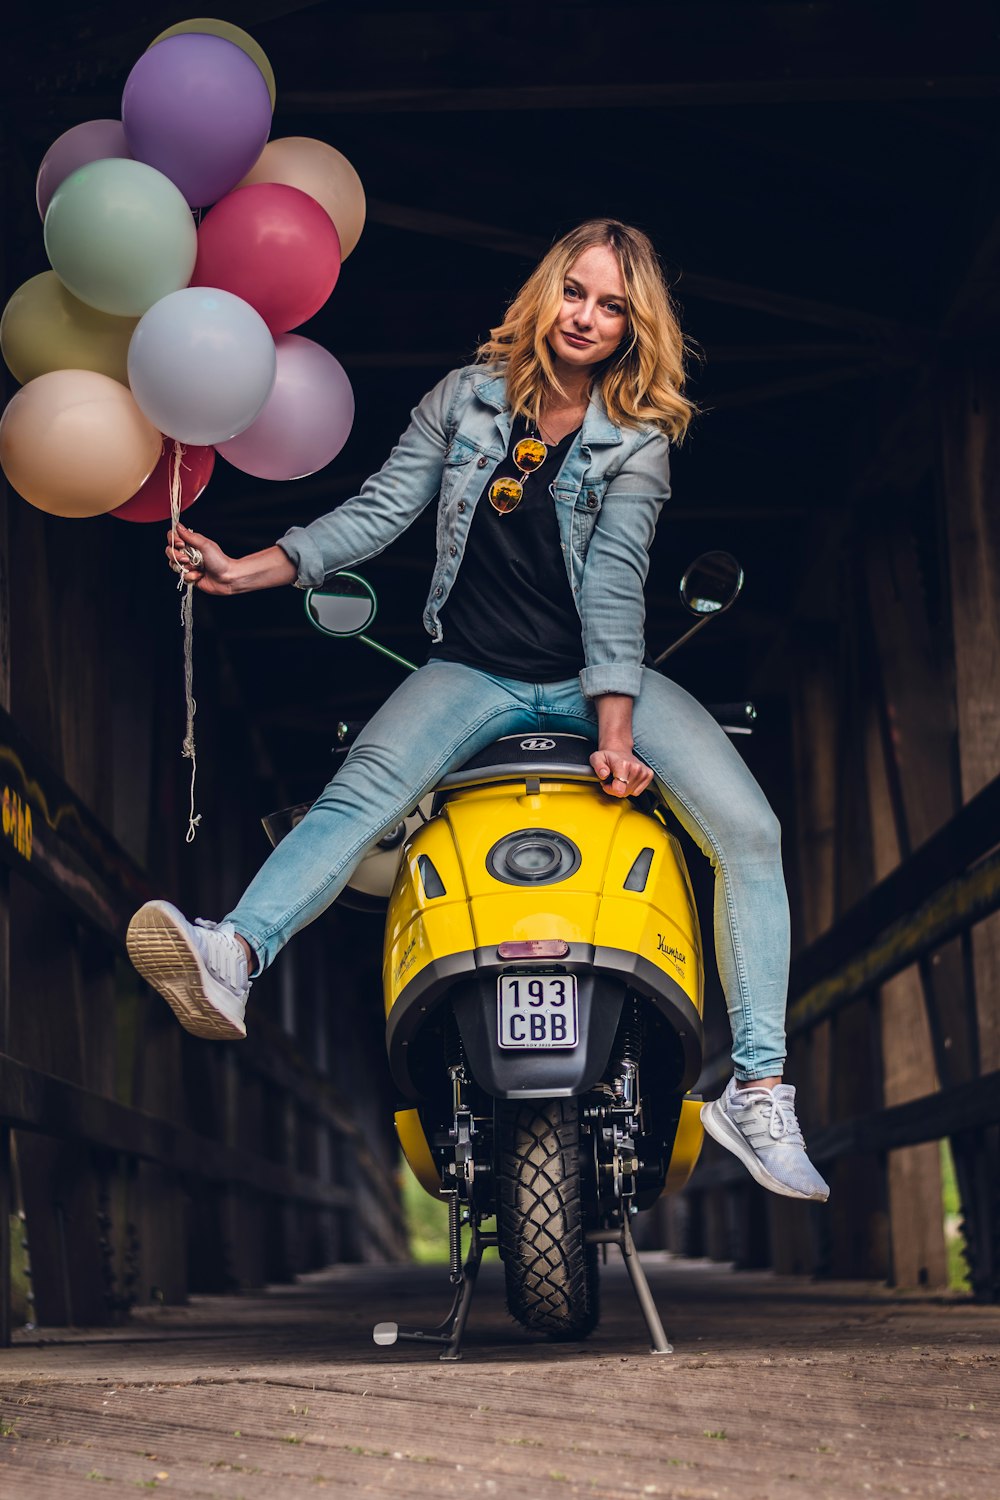 woman in black leather jacket and blue denim jeans riding yellow motorcycle holding balloons